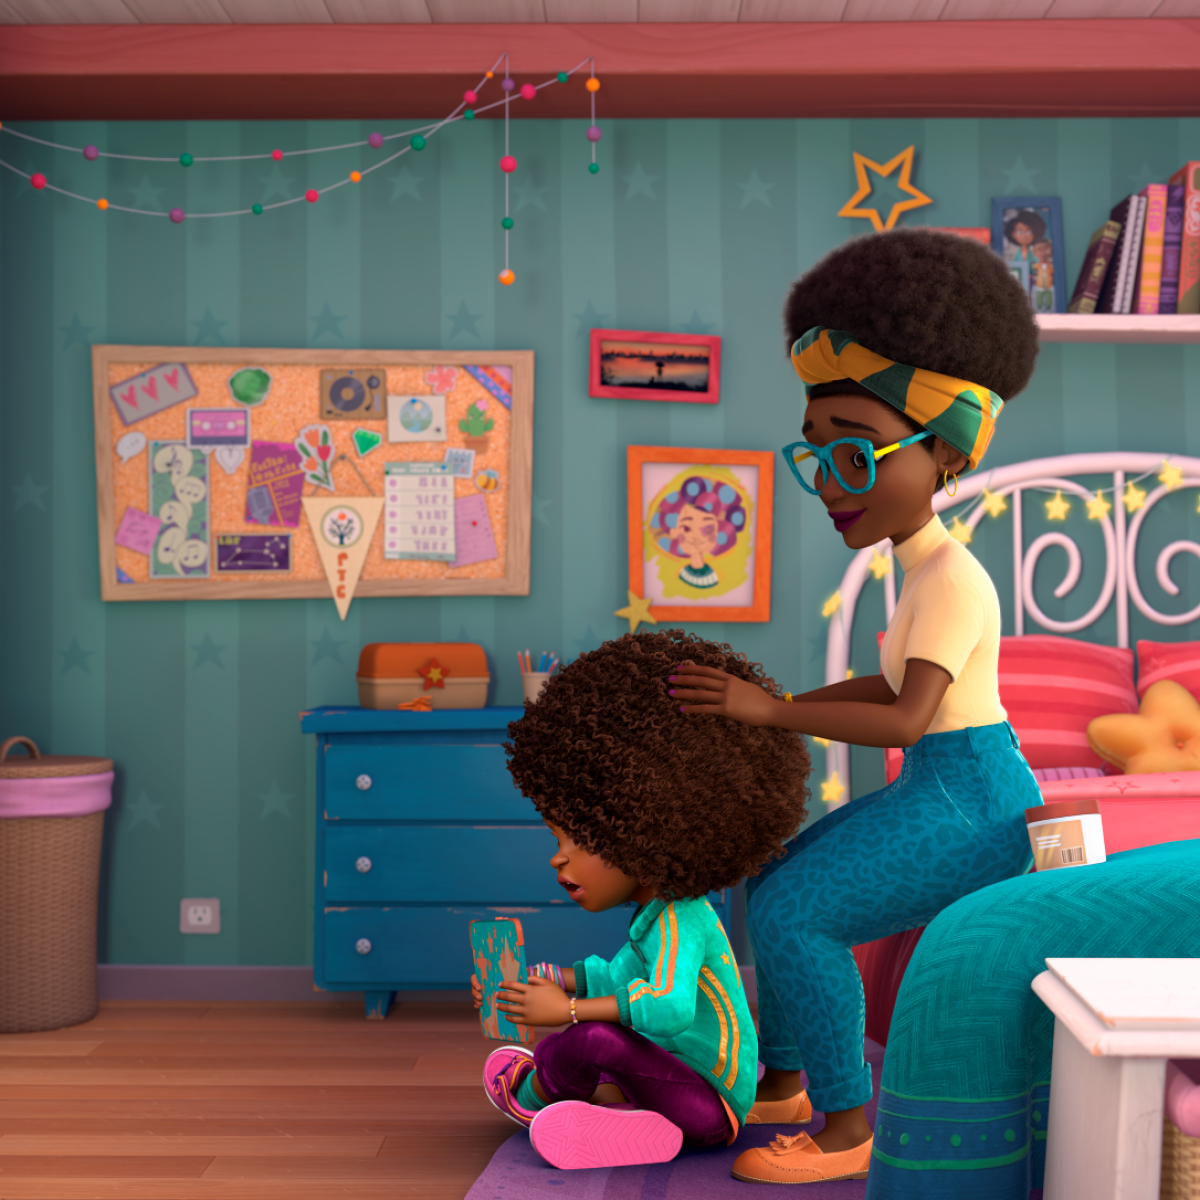 How Netflixs Karmas World Addresses Microaggressions Black Girls Experience With Their Hair